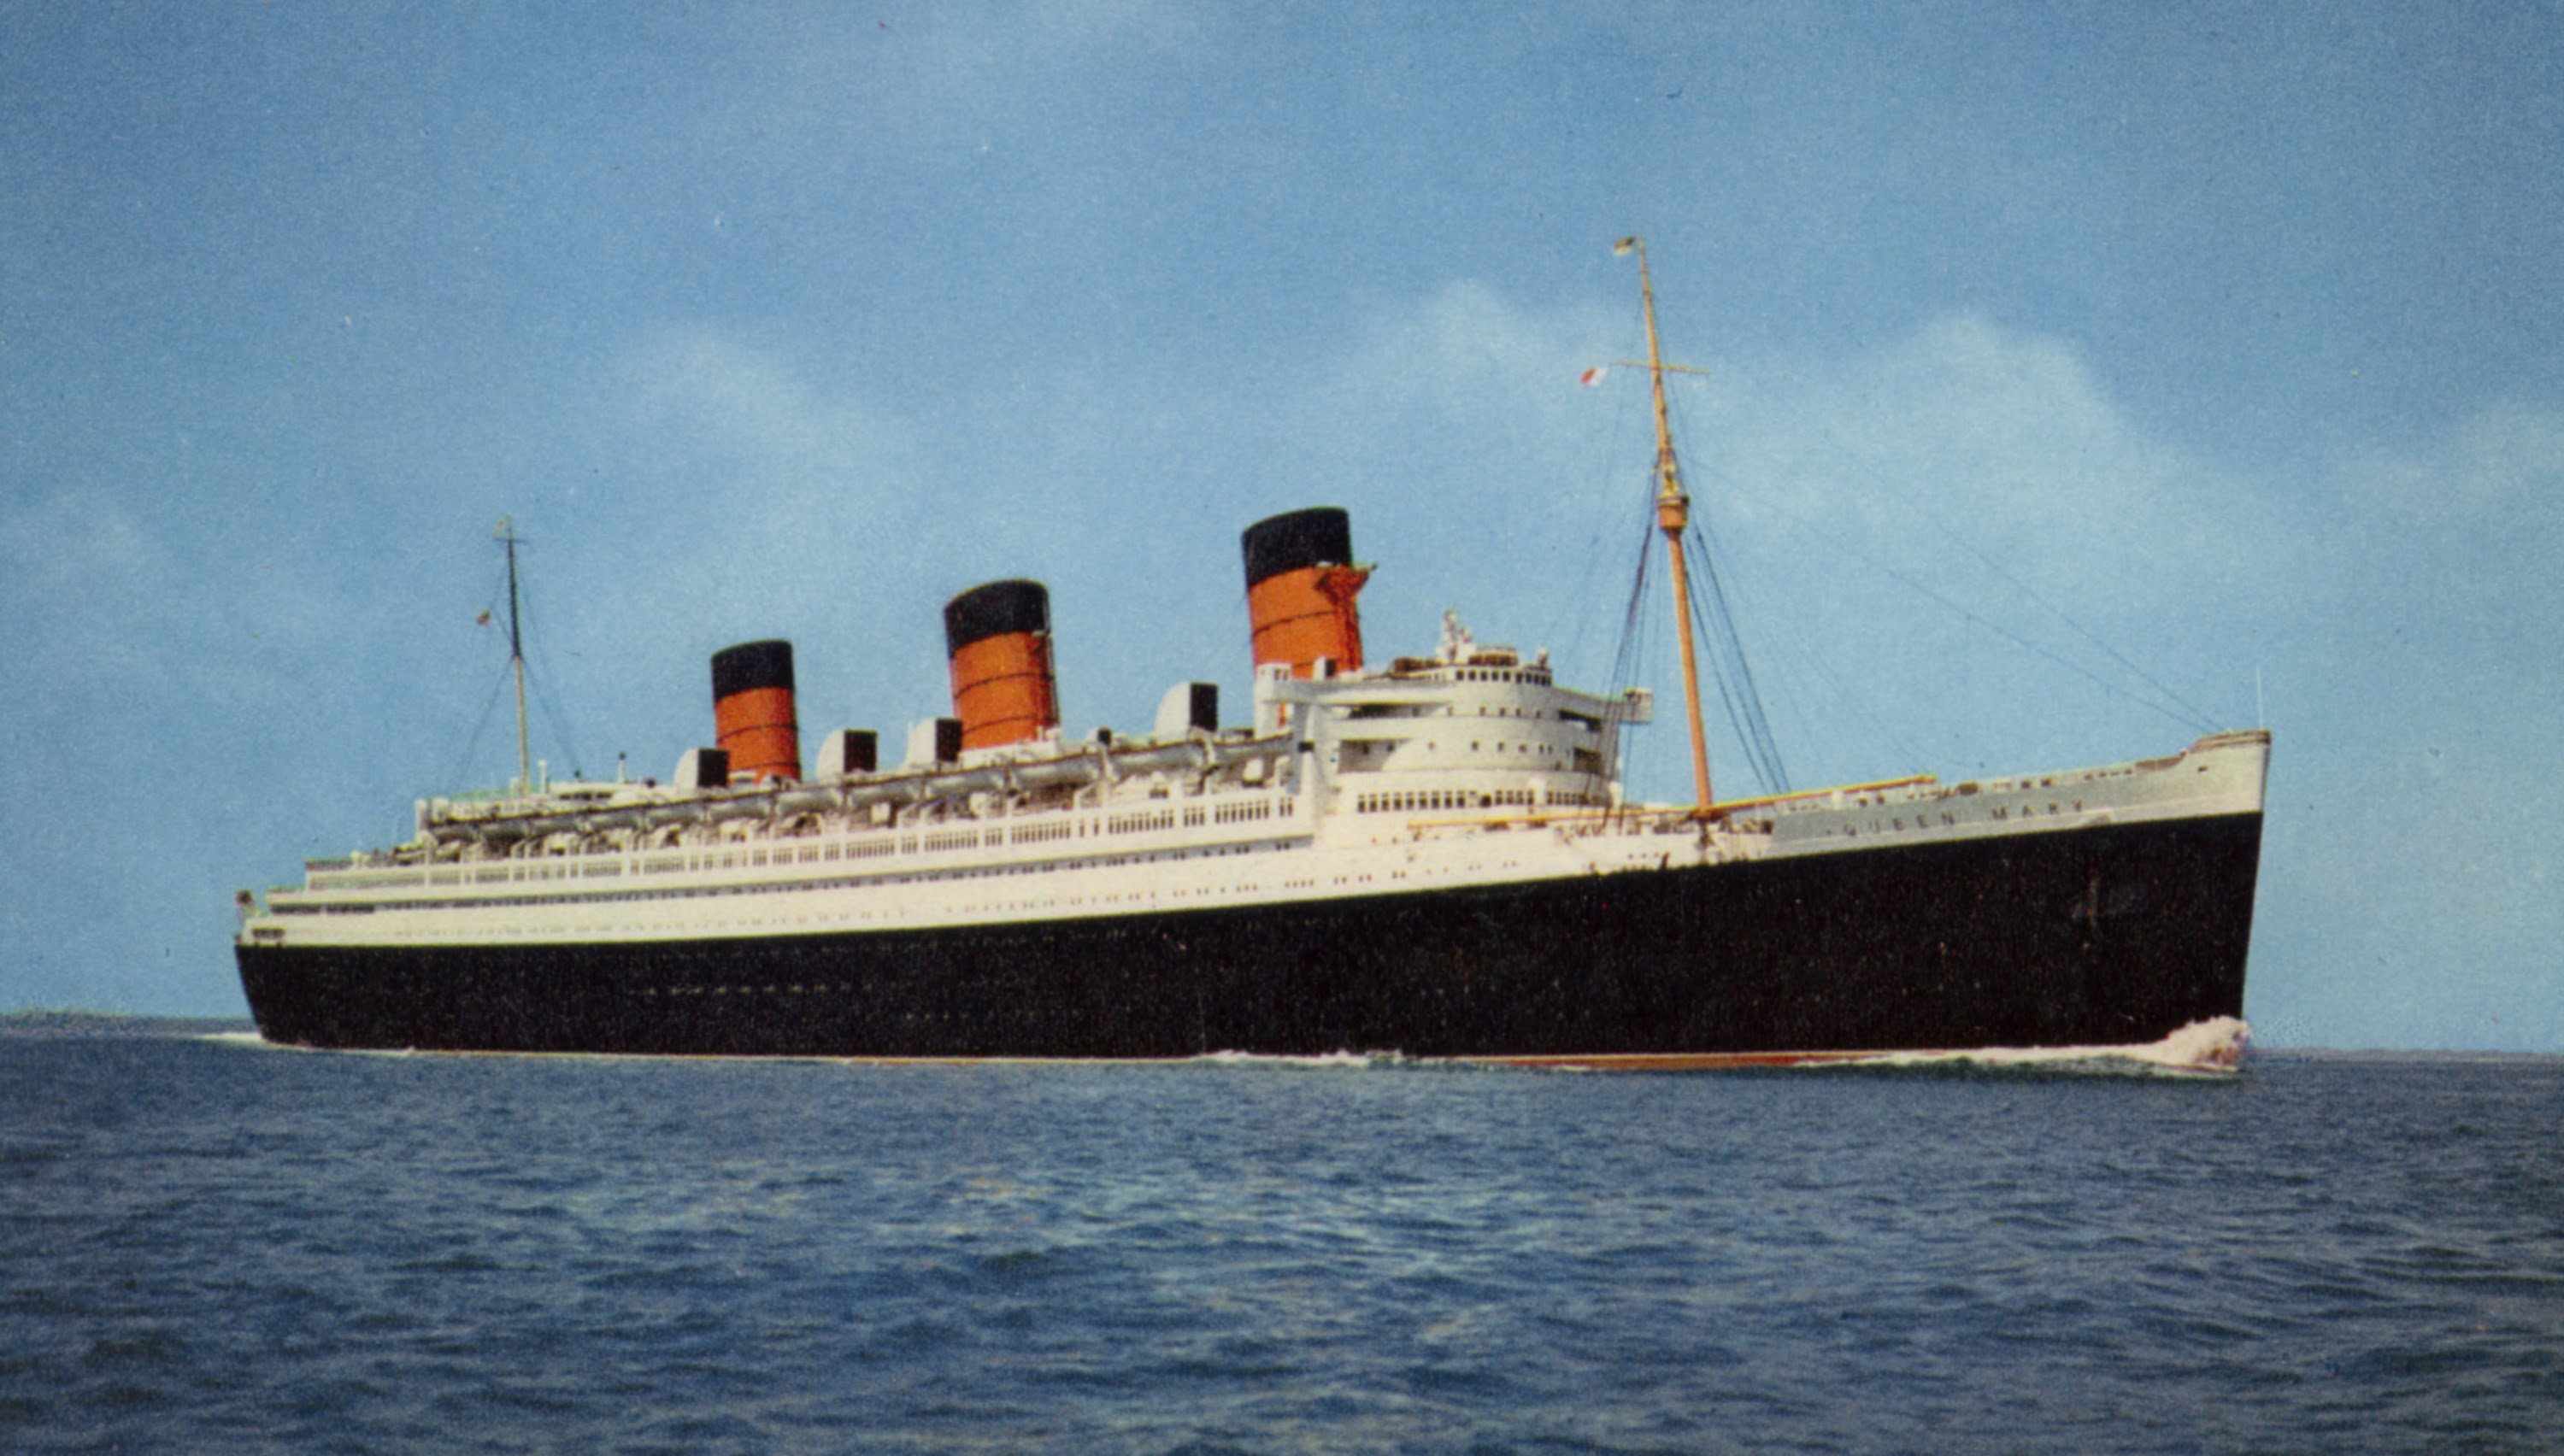 R.M.S. Queen Mary I